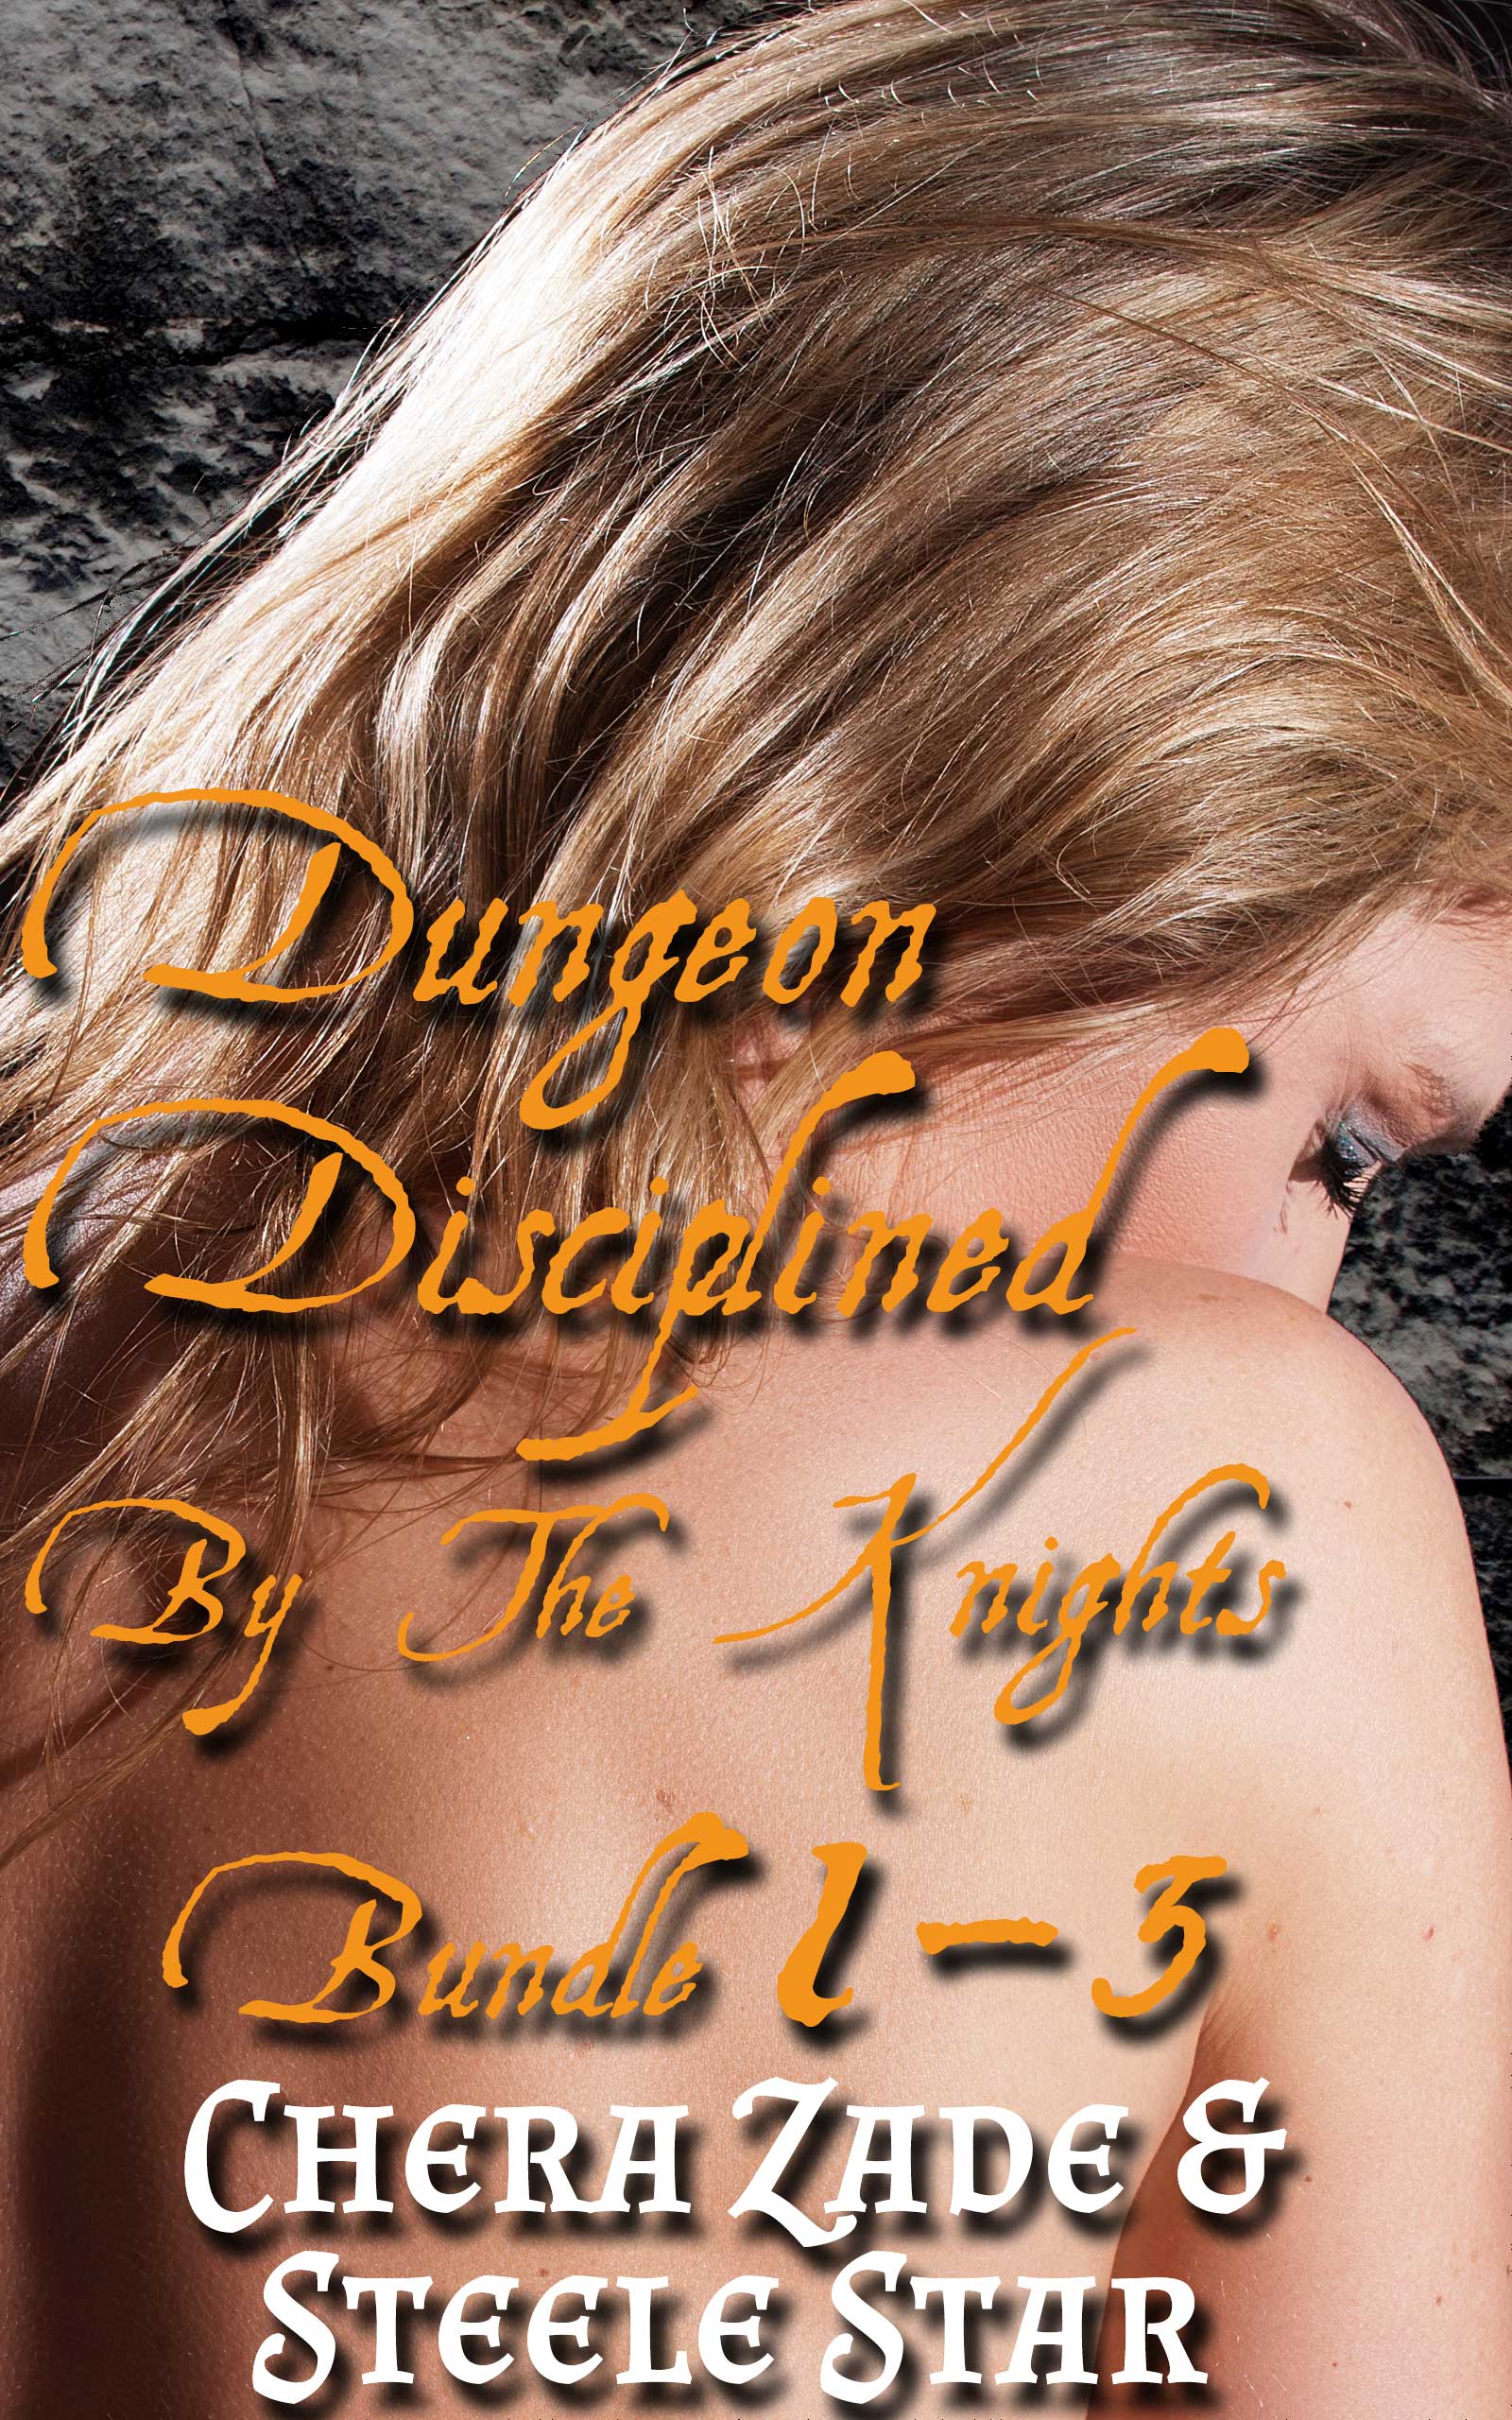 Dungeon Disciplined By The Knights bundle 1 – 3 (Medieval Dungeon Punishment Stories)